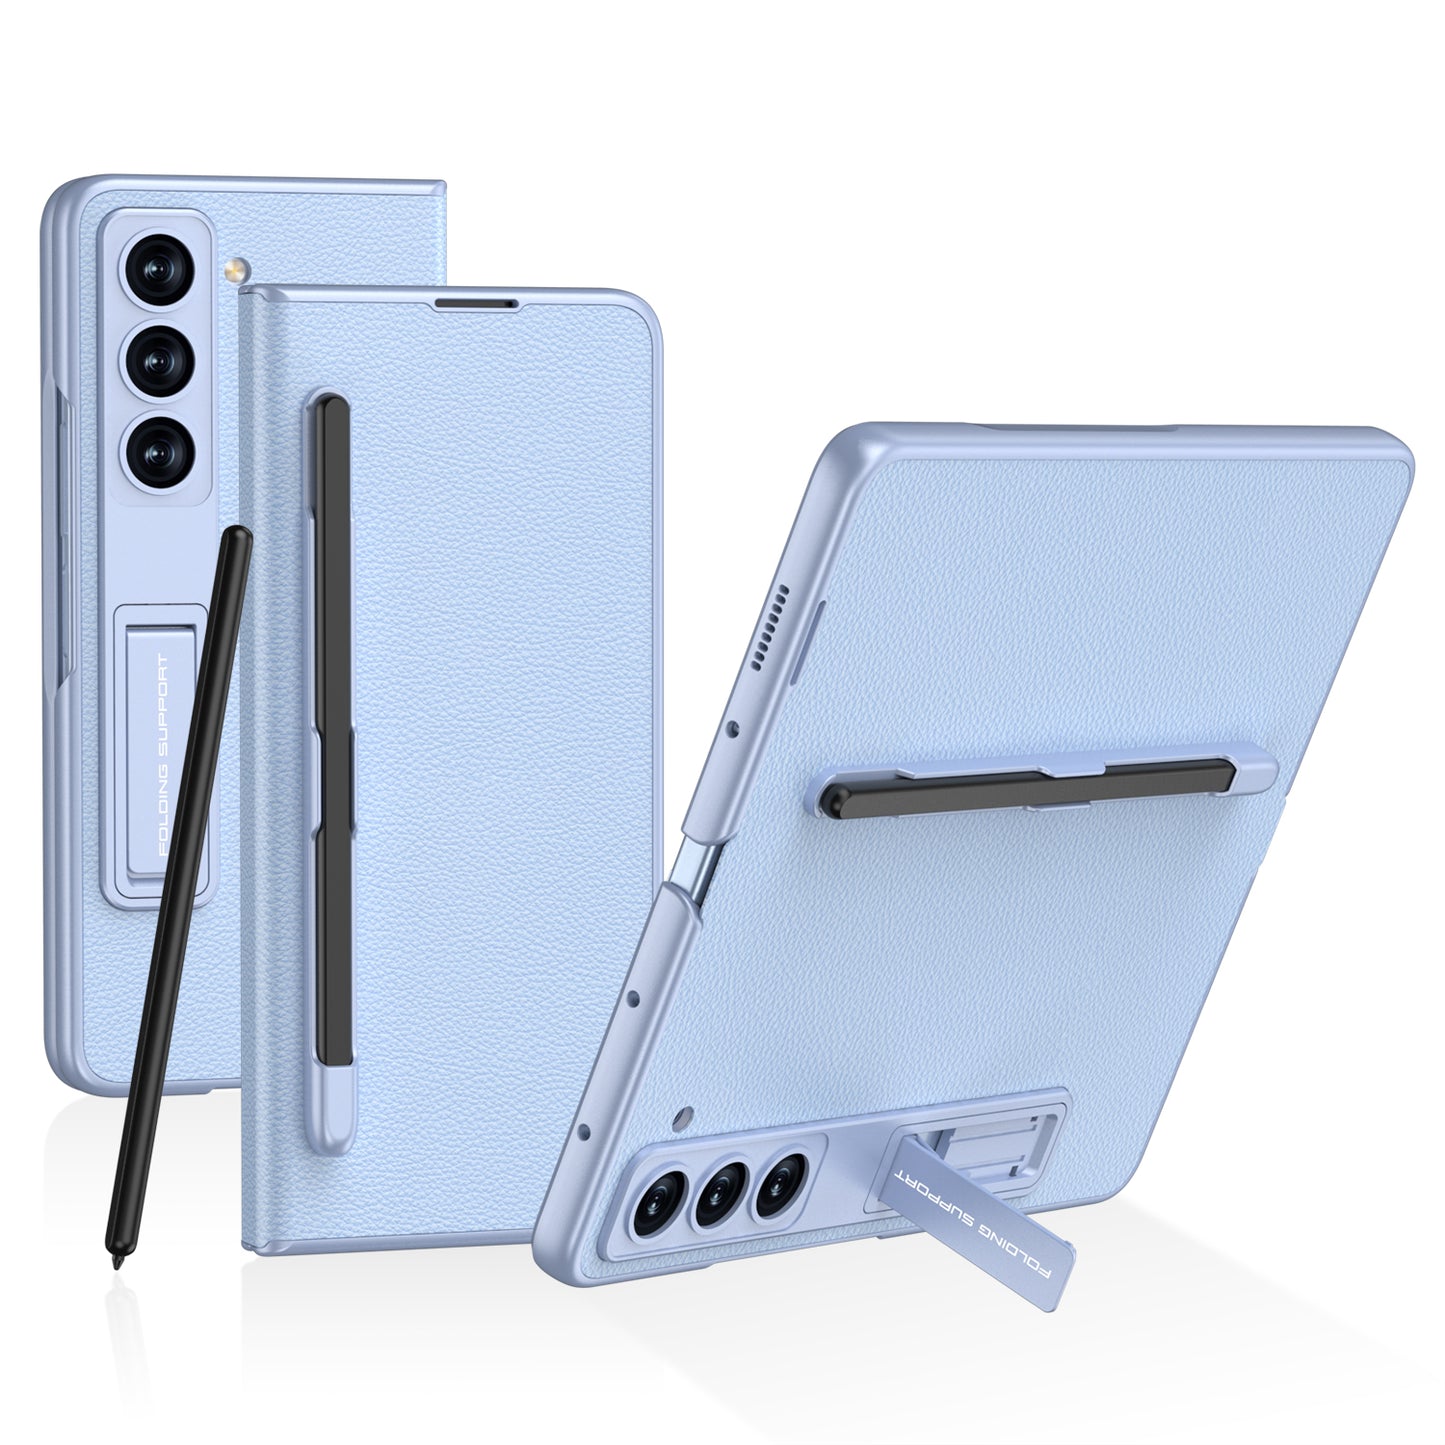 Full Protection Samsung Z Fold5 Upgrade Border Protection Case With 5 Generation S Pen Slot